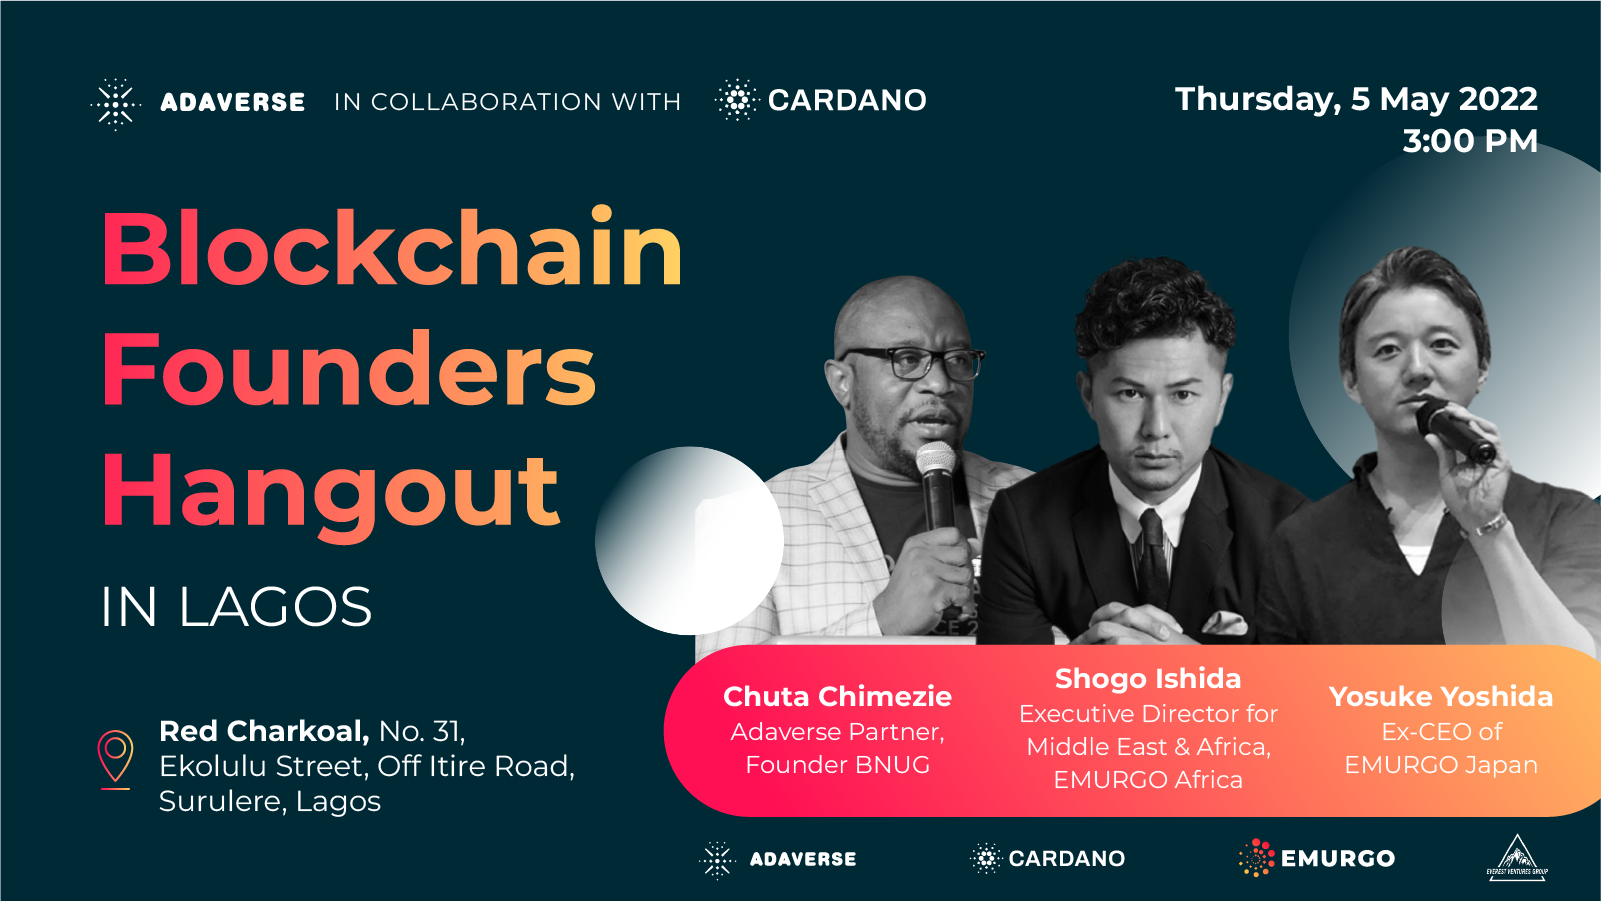 EMURGO Africa and Adaverse to Host Blockchain Founders Hangout in Lagos, Nigeria